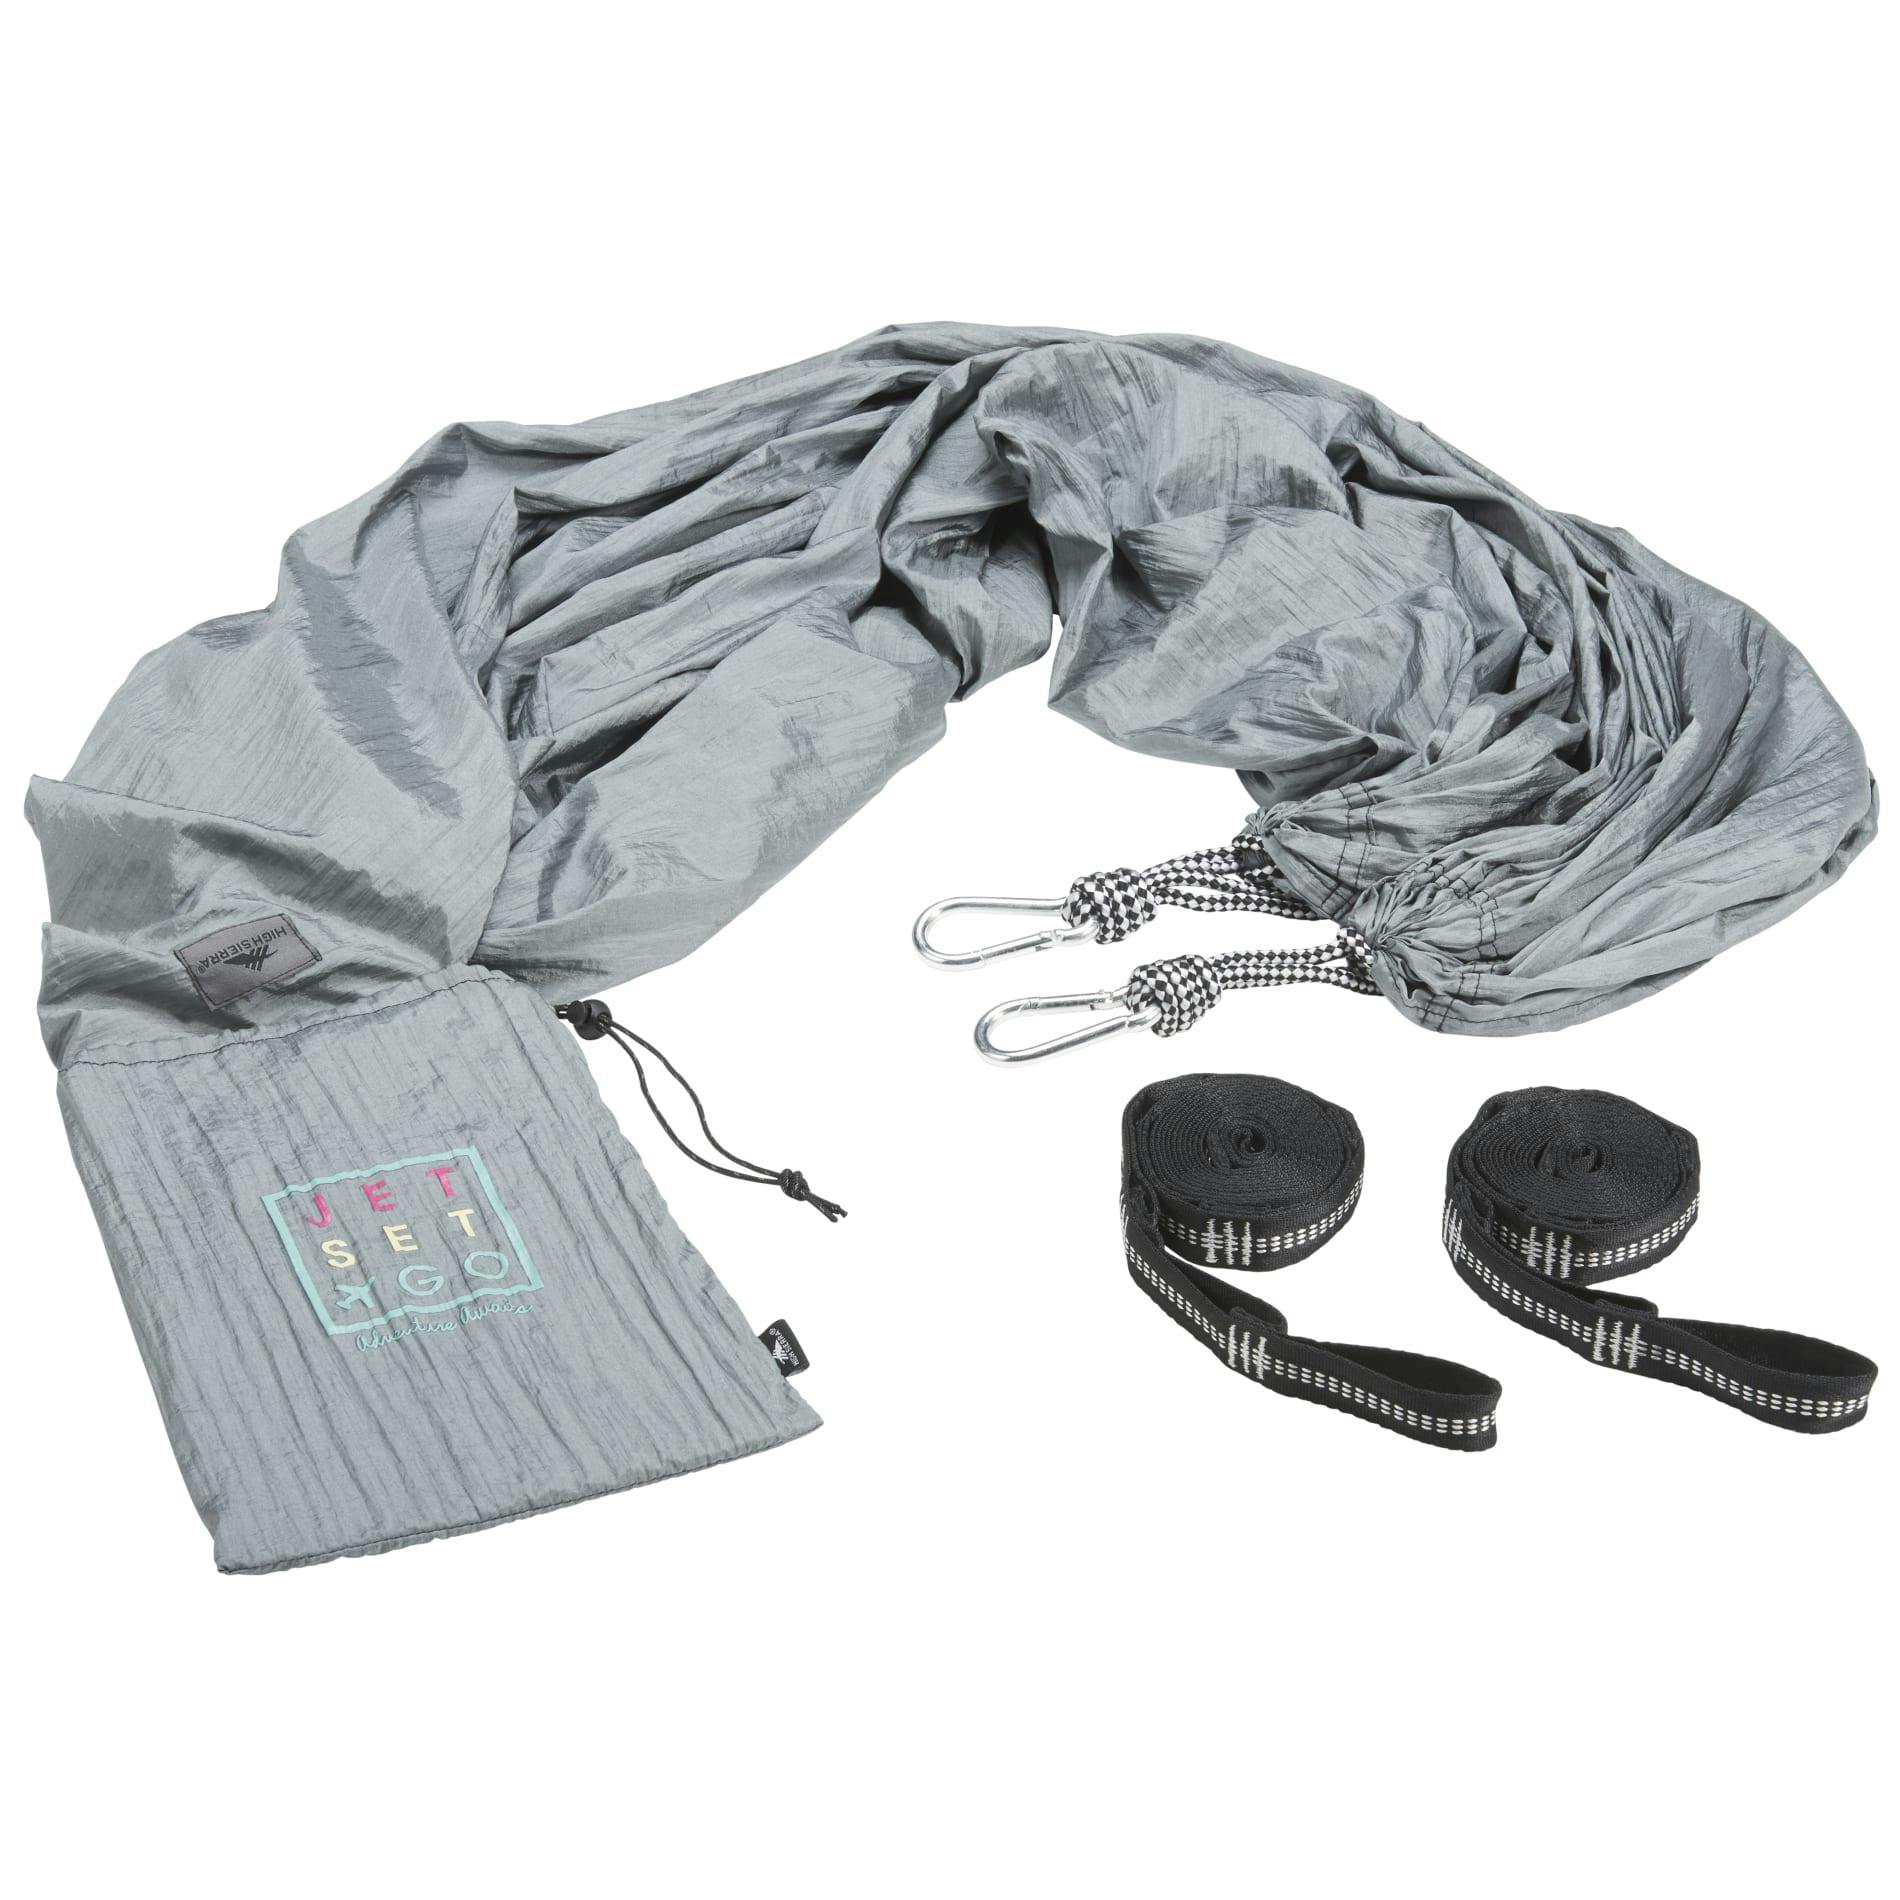 High Sierra Packable Hammock with Straps - additional Image 3